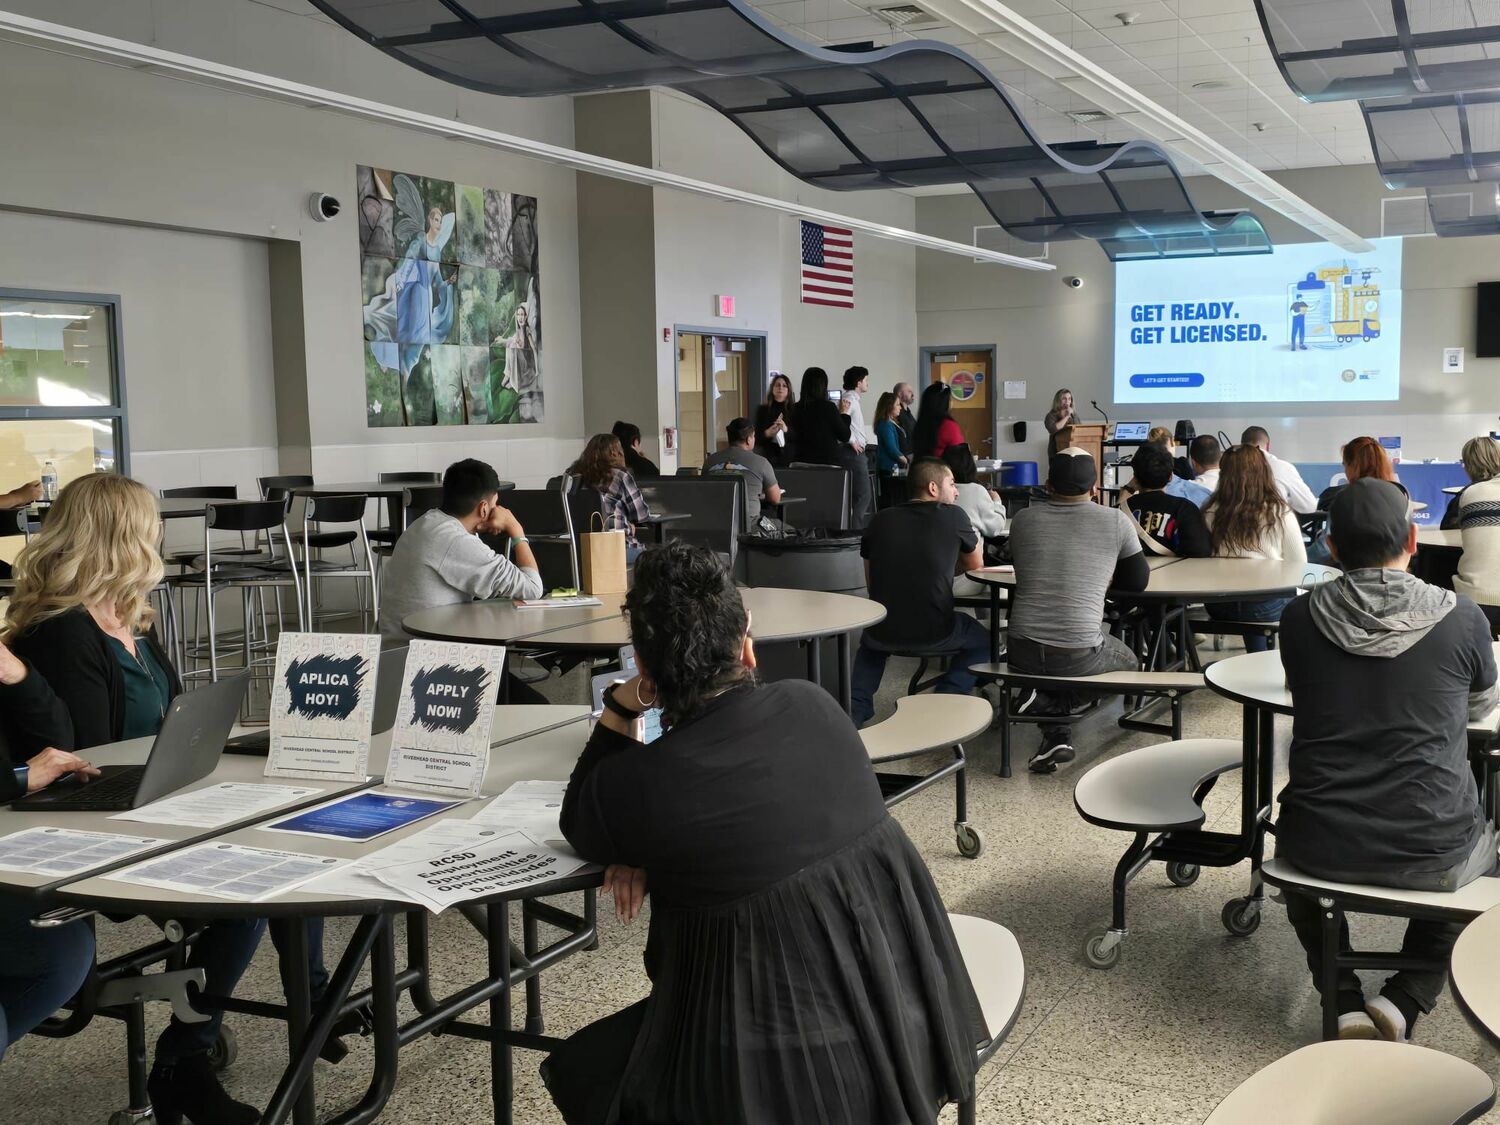 Organización Latino Americana of Eastern Long Island hosted a professional-licensing workshop last month in Riverhead. COURTESY OLA OF EASTERN LONG ISLAND